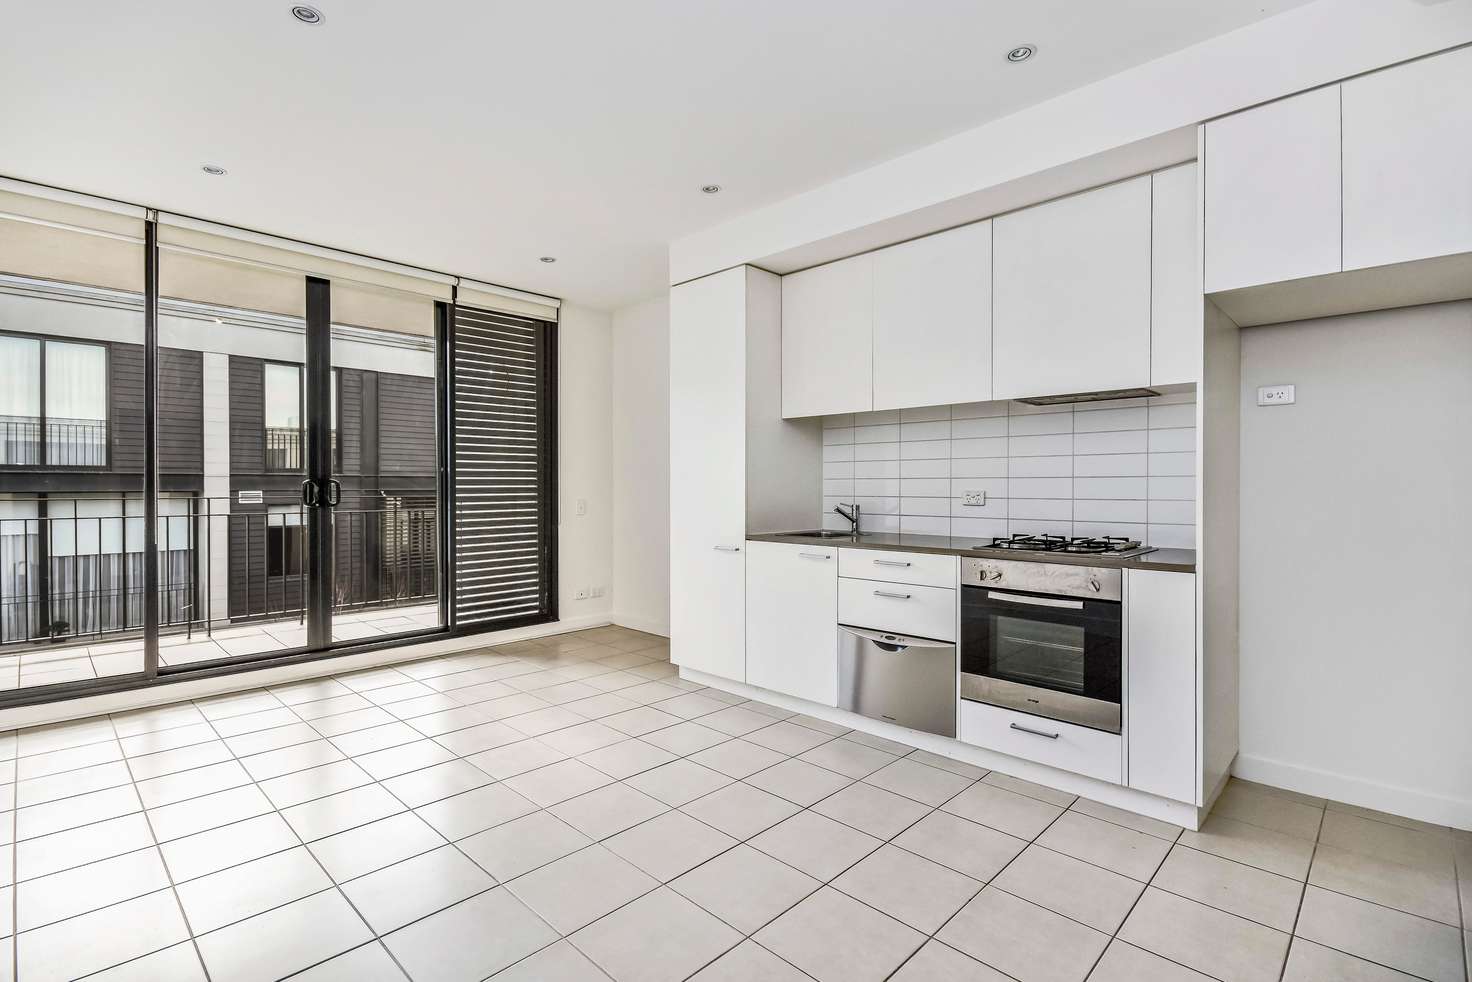 Main view of Homely apartment listing, 202/33 Cliveden Close, East Melbourne VIC 3002